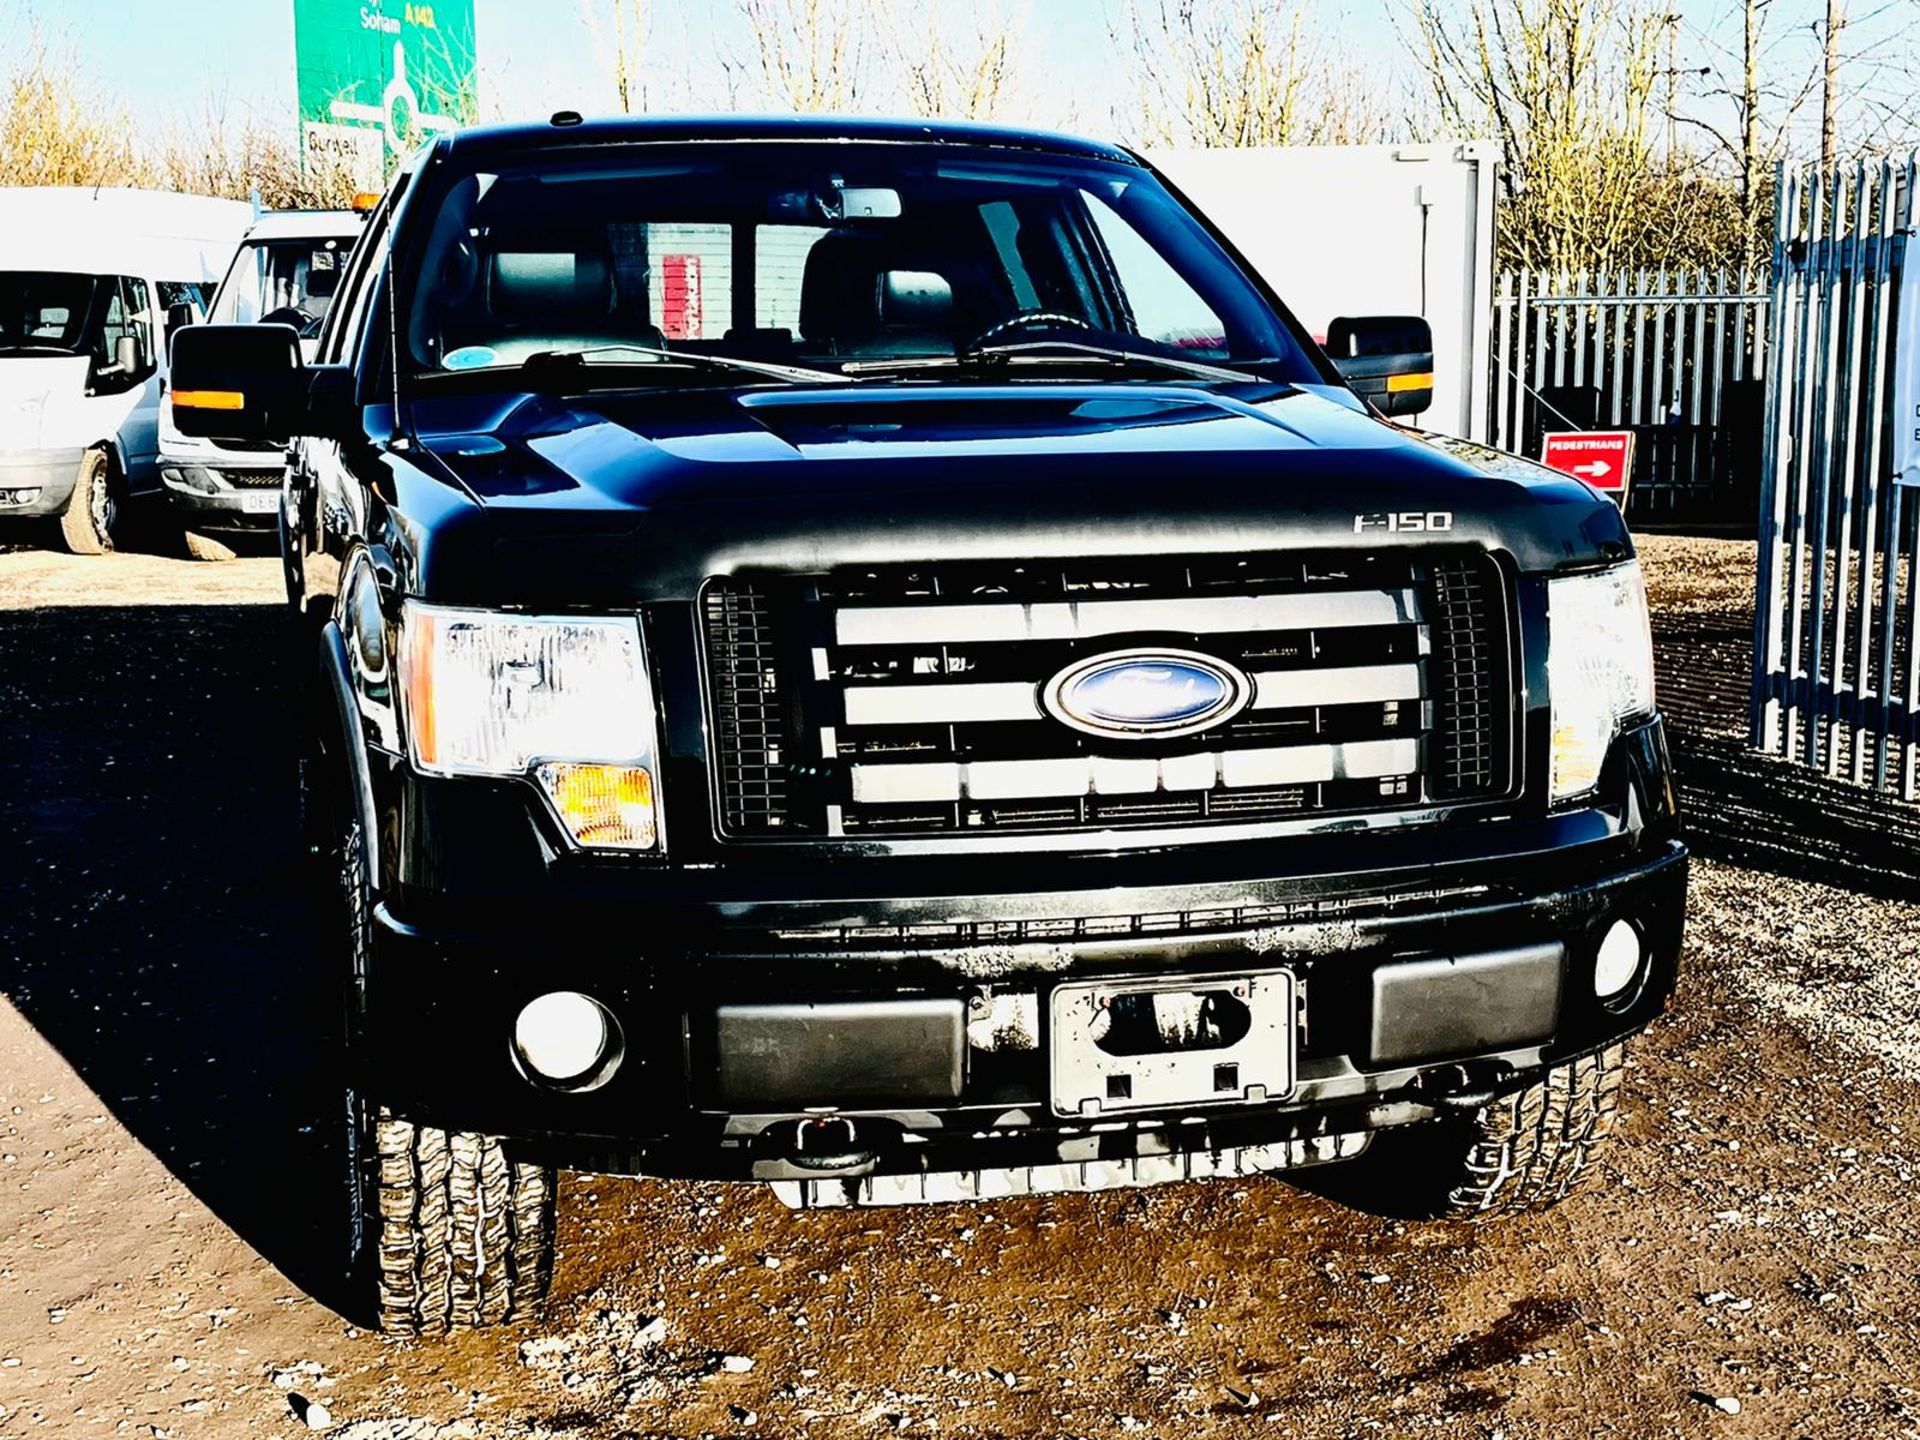 Ford F-150 5.4L V8 SuperCab 4WD FX4 Edition '2010 Year' Colour Coded Package - Top Spec - Image 7 of 44